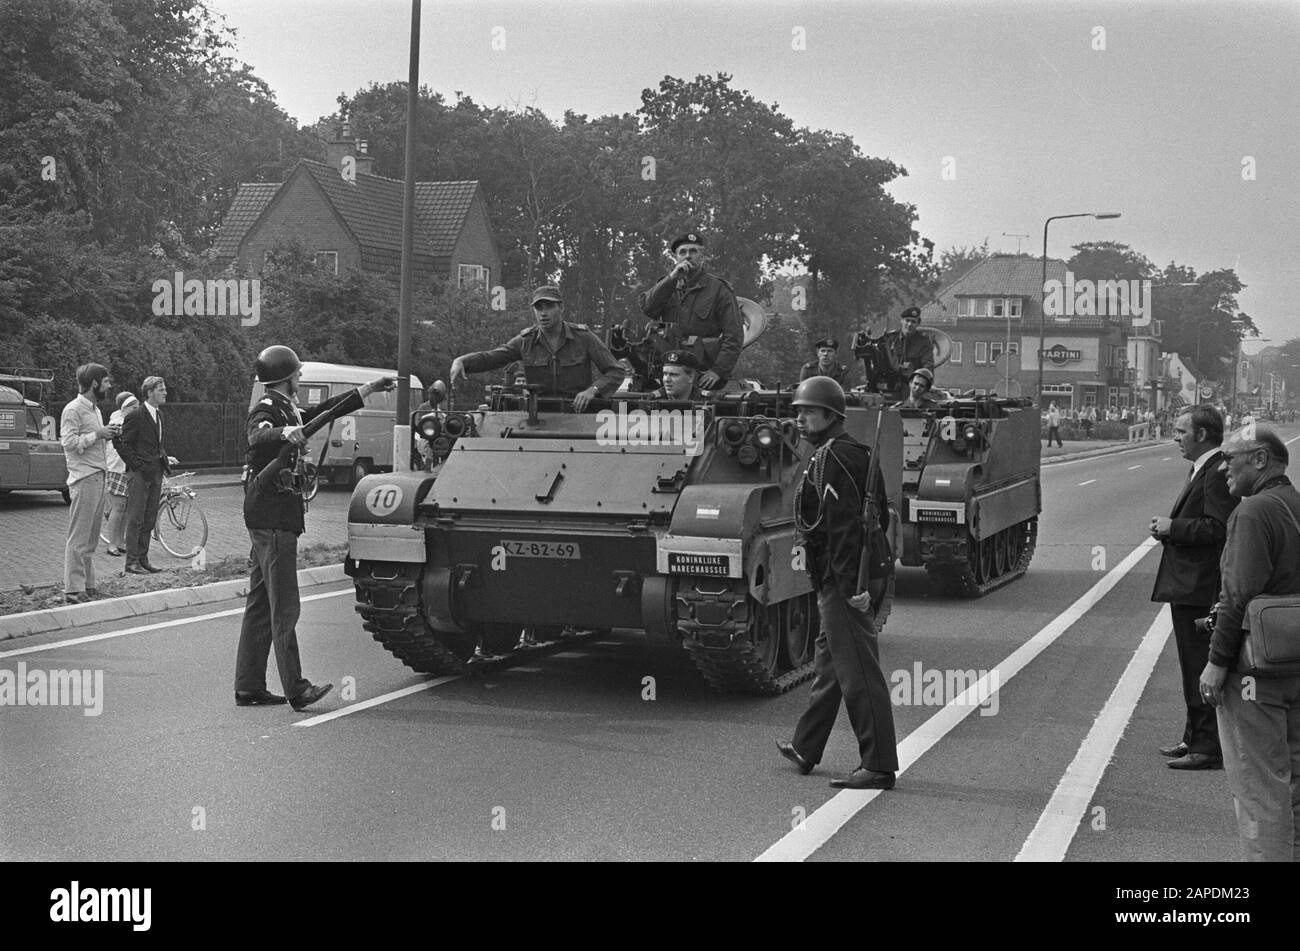 Ambonese have occupied the home of the Indonesian Ambassador in Wassenaar, M113C&V armored cars of the marechaussee stand by the property Date: August 31, 1970 Location: Indonesia, Indonesia, Wassenaar, South-Holland Keywords: embassies, police, vehicles Institution name: Koninklijke Marechaussee Stock Photo